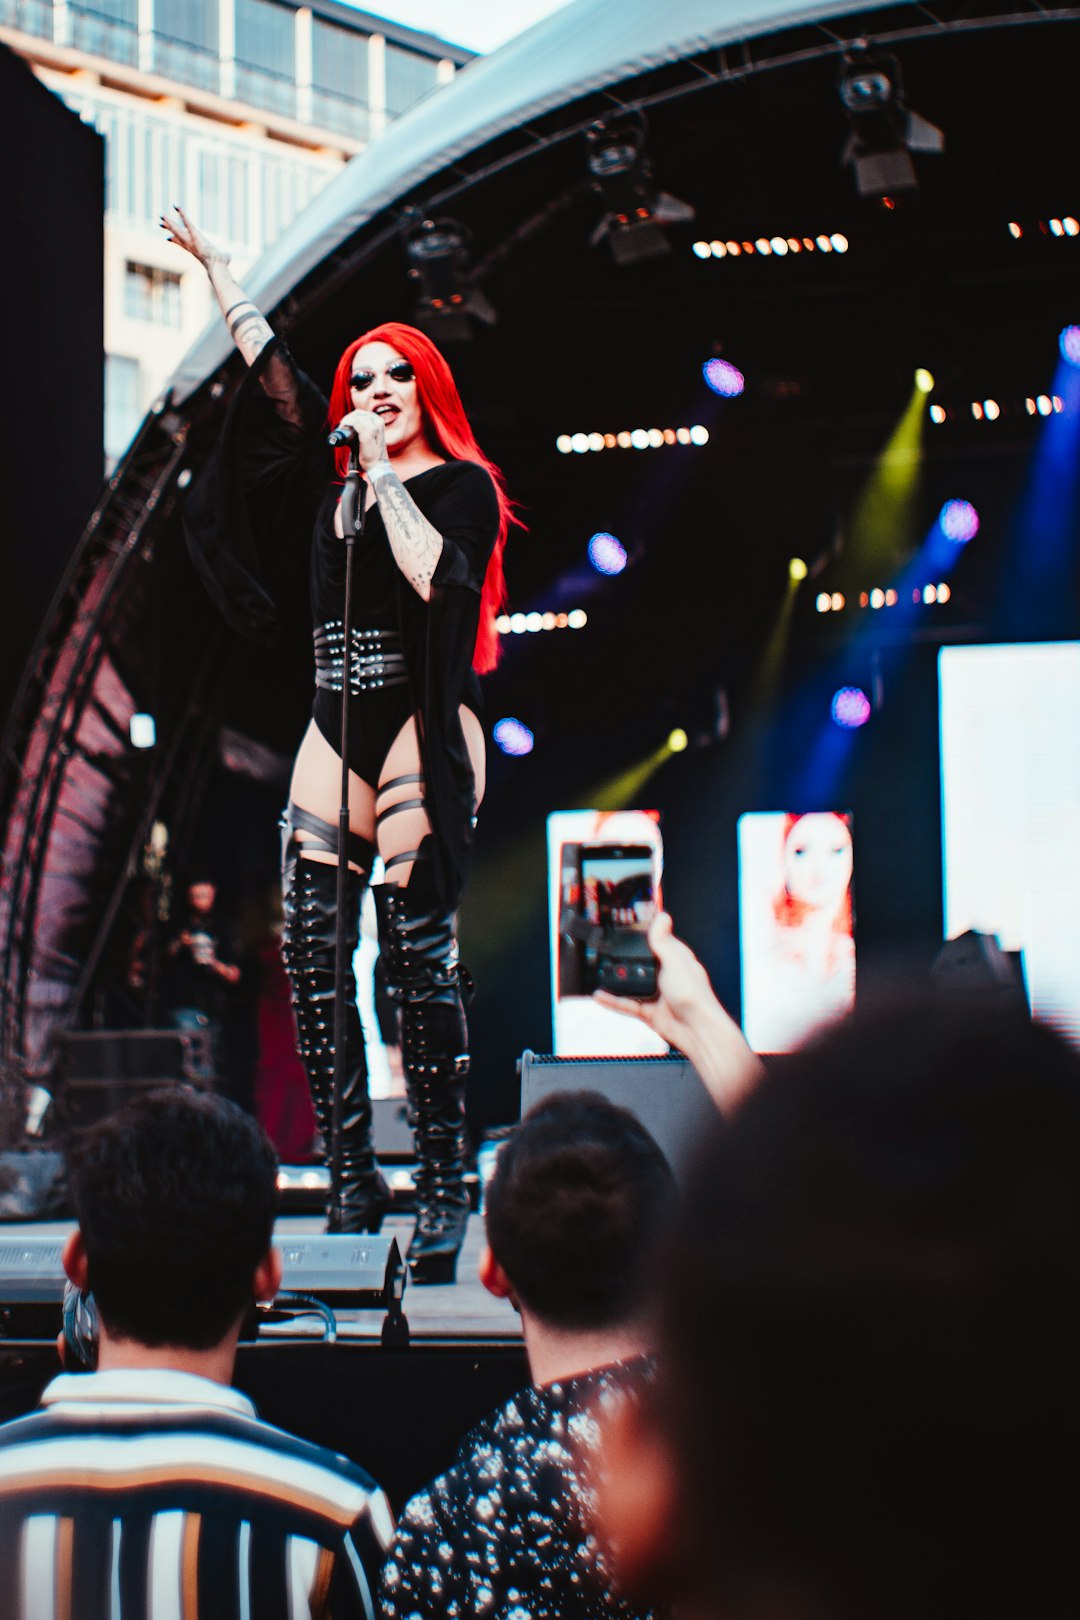 red haired woman performing on stage during daytime